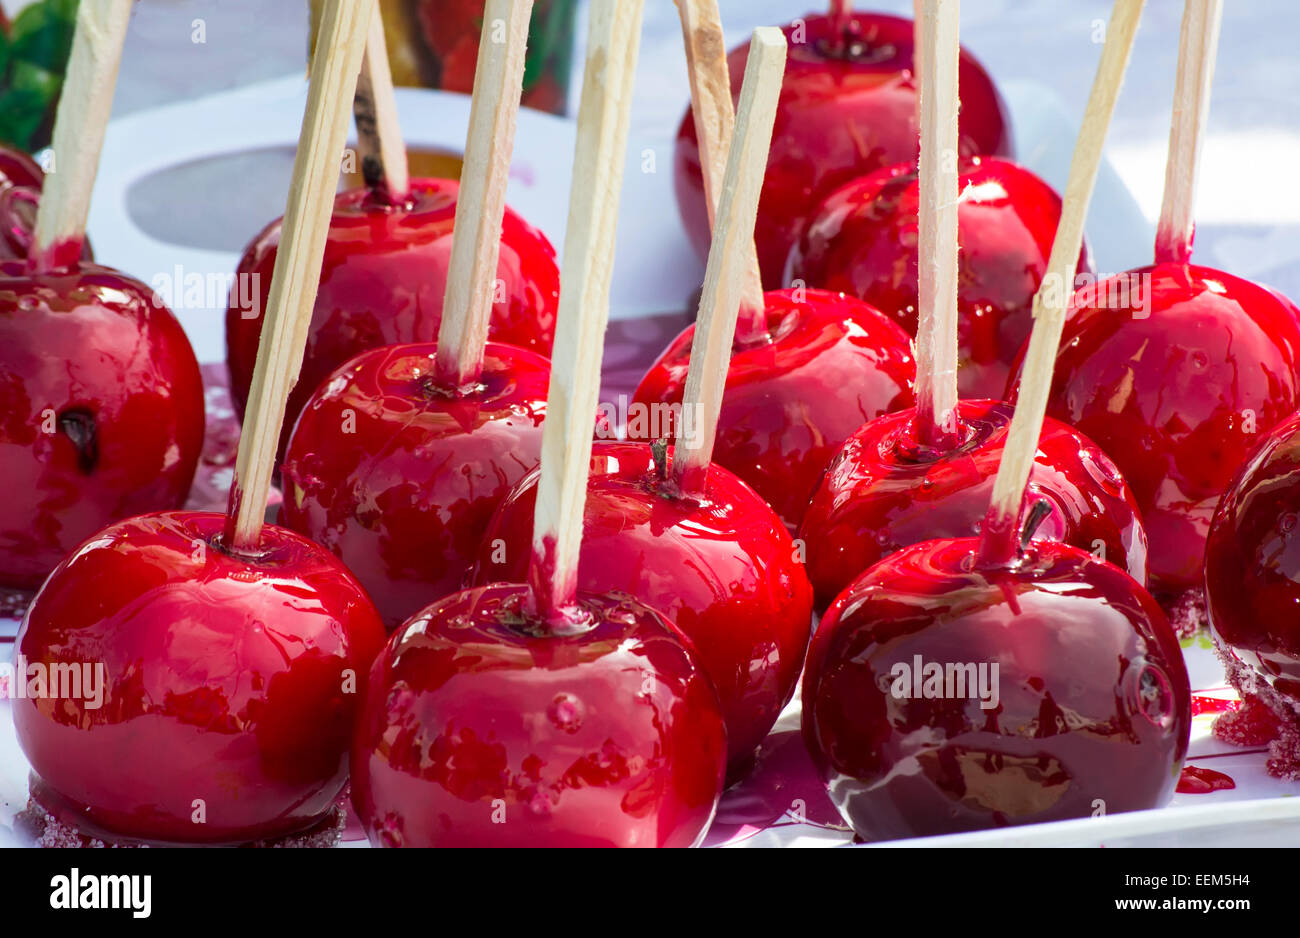 Dozen of delicious glazed apples covered in intense red sugar coating Stock Photo